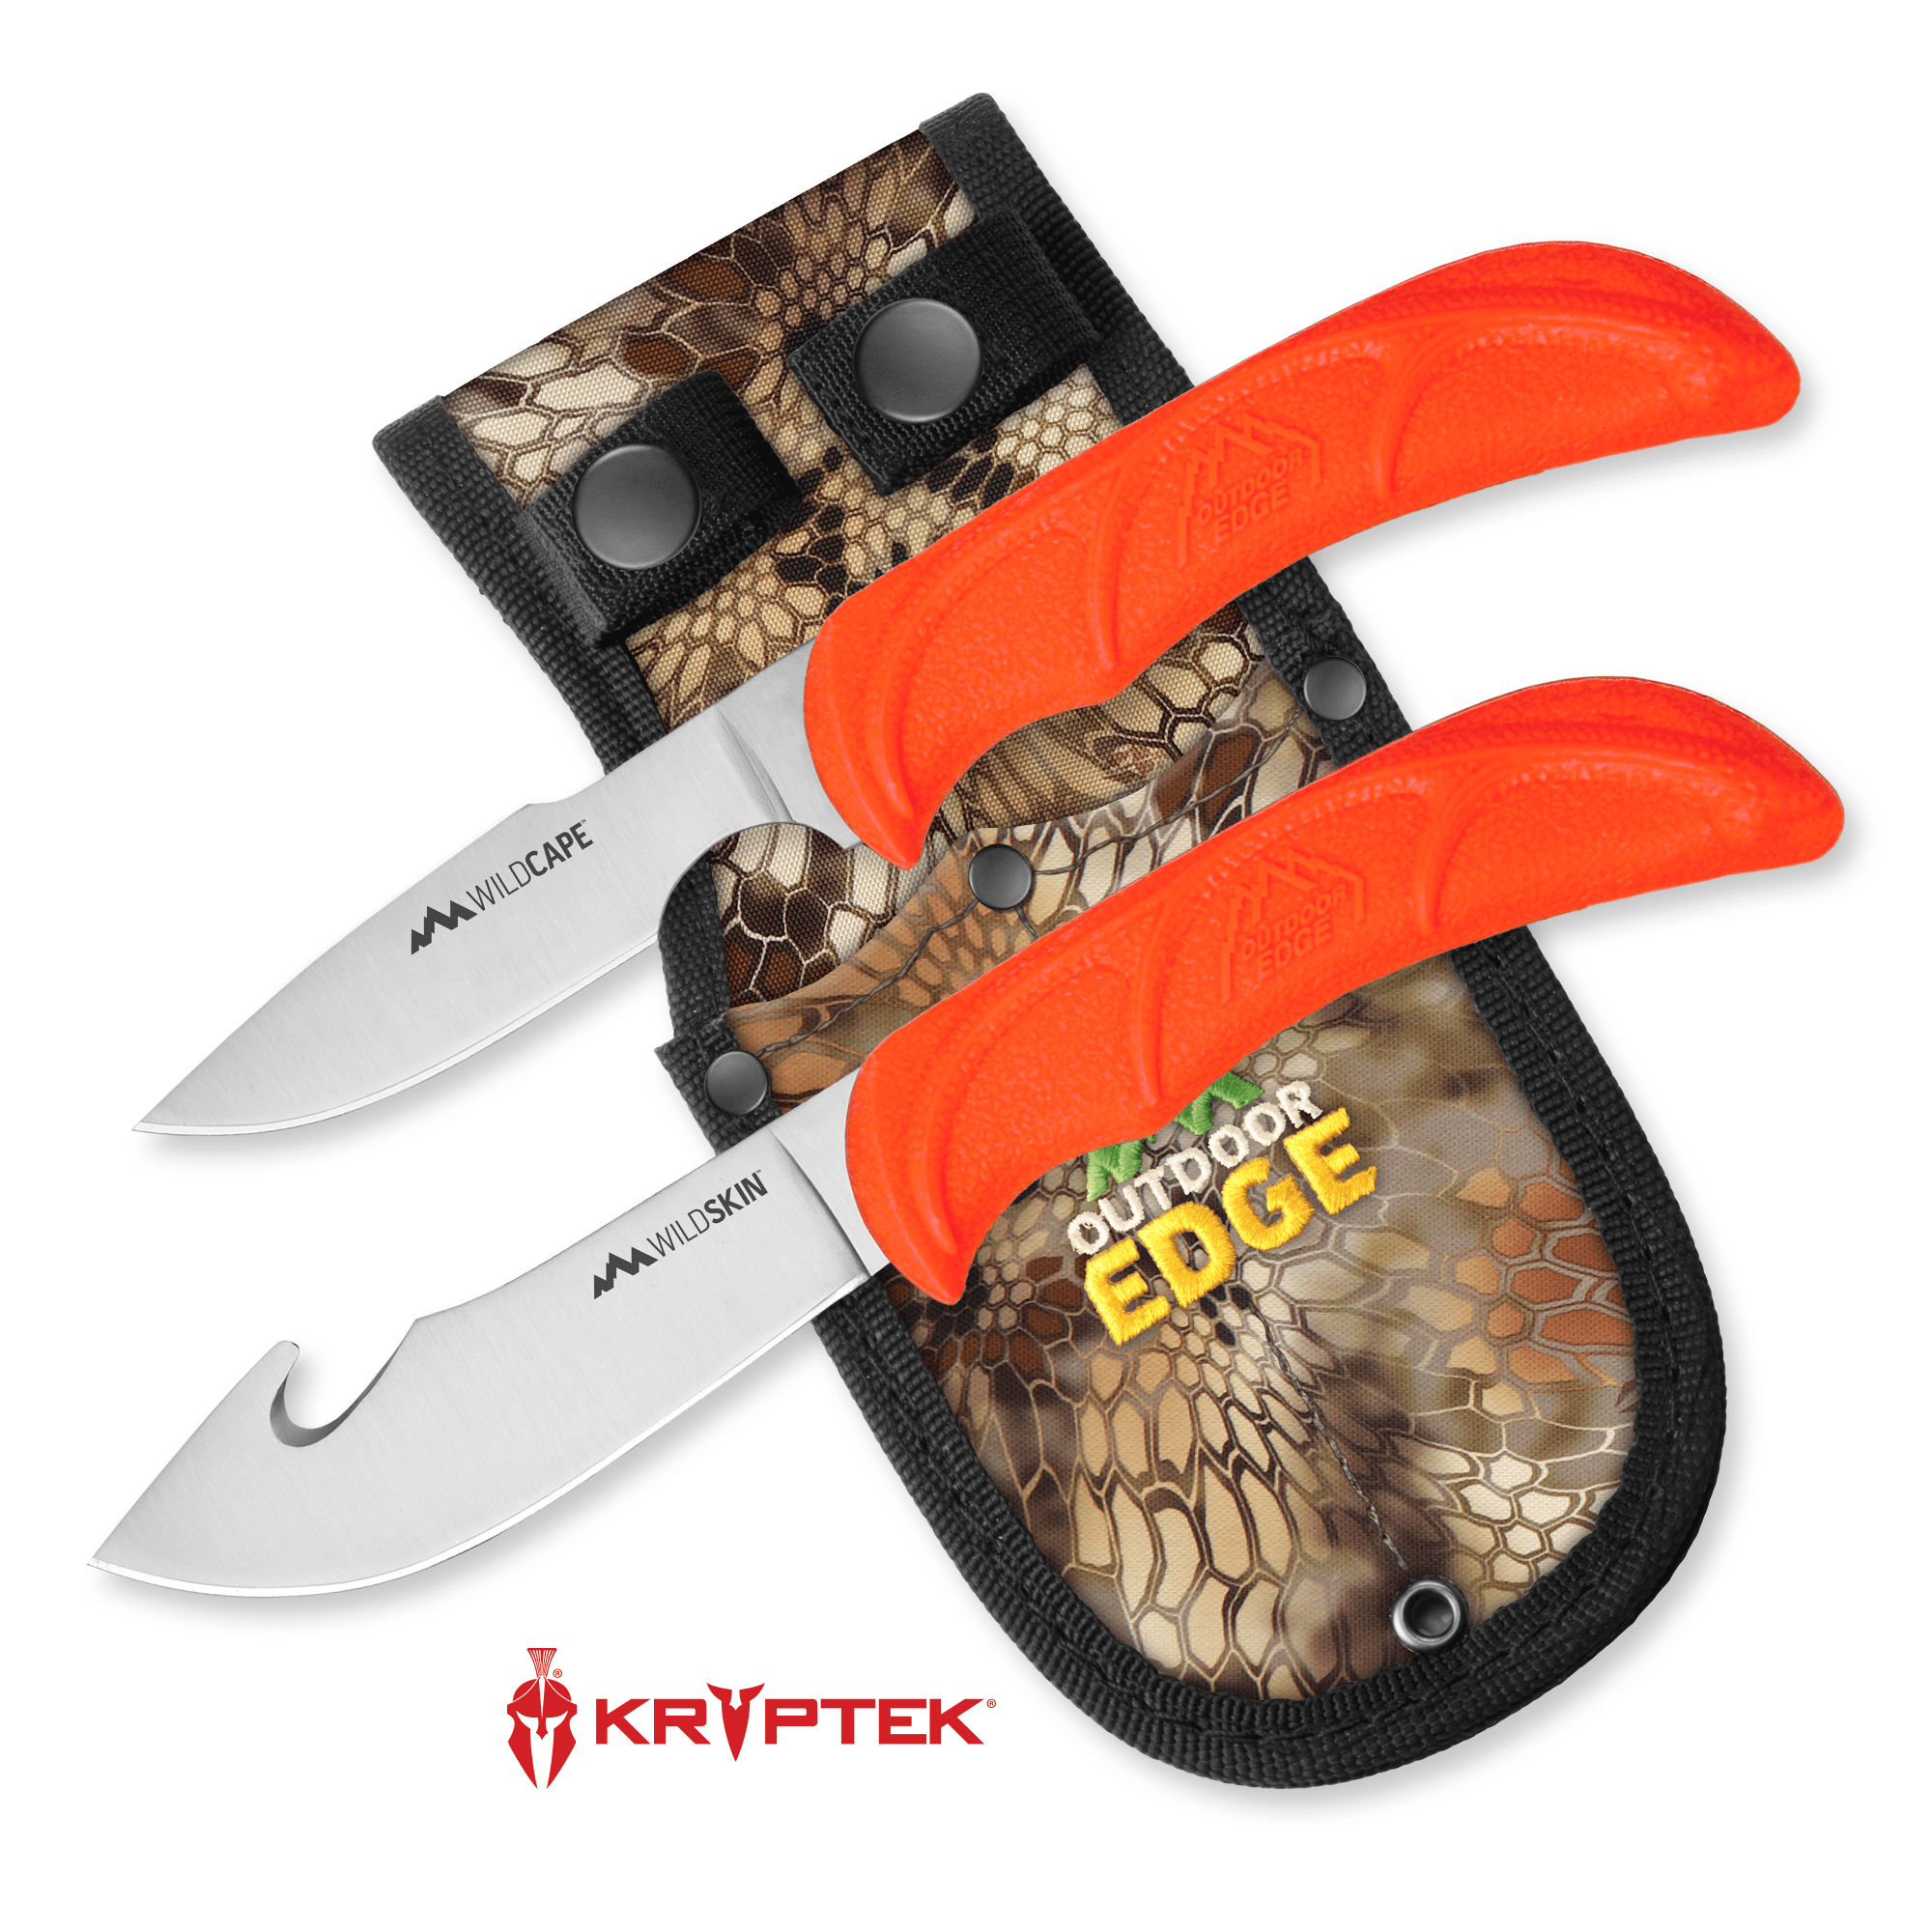 Outdoor Edge WildPair Gut-hook Skinner and Caping Knife Product Photo